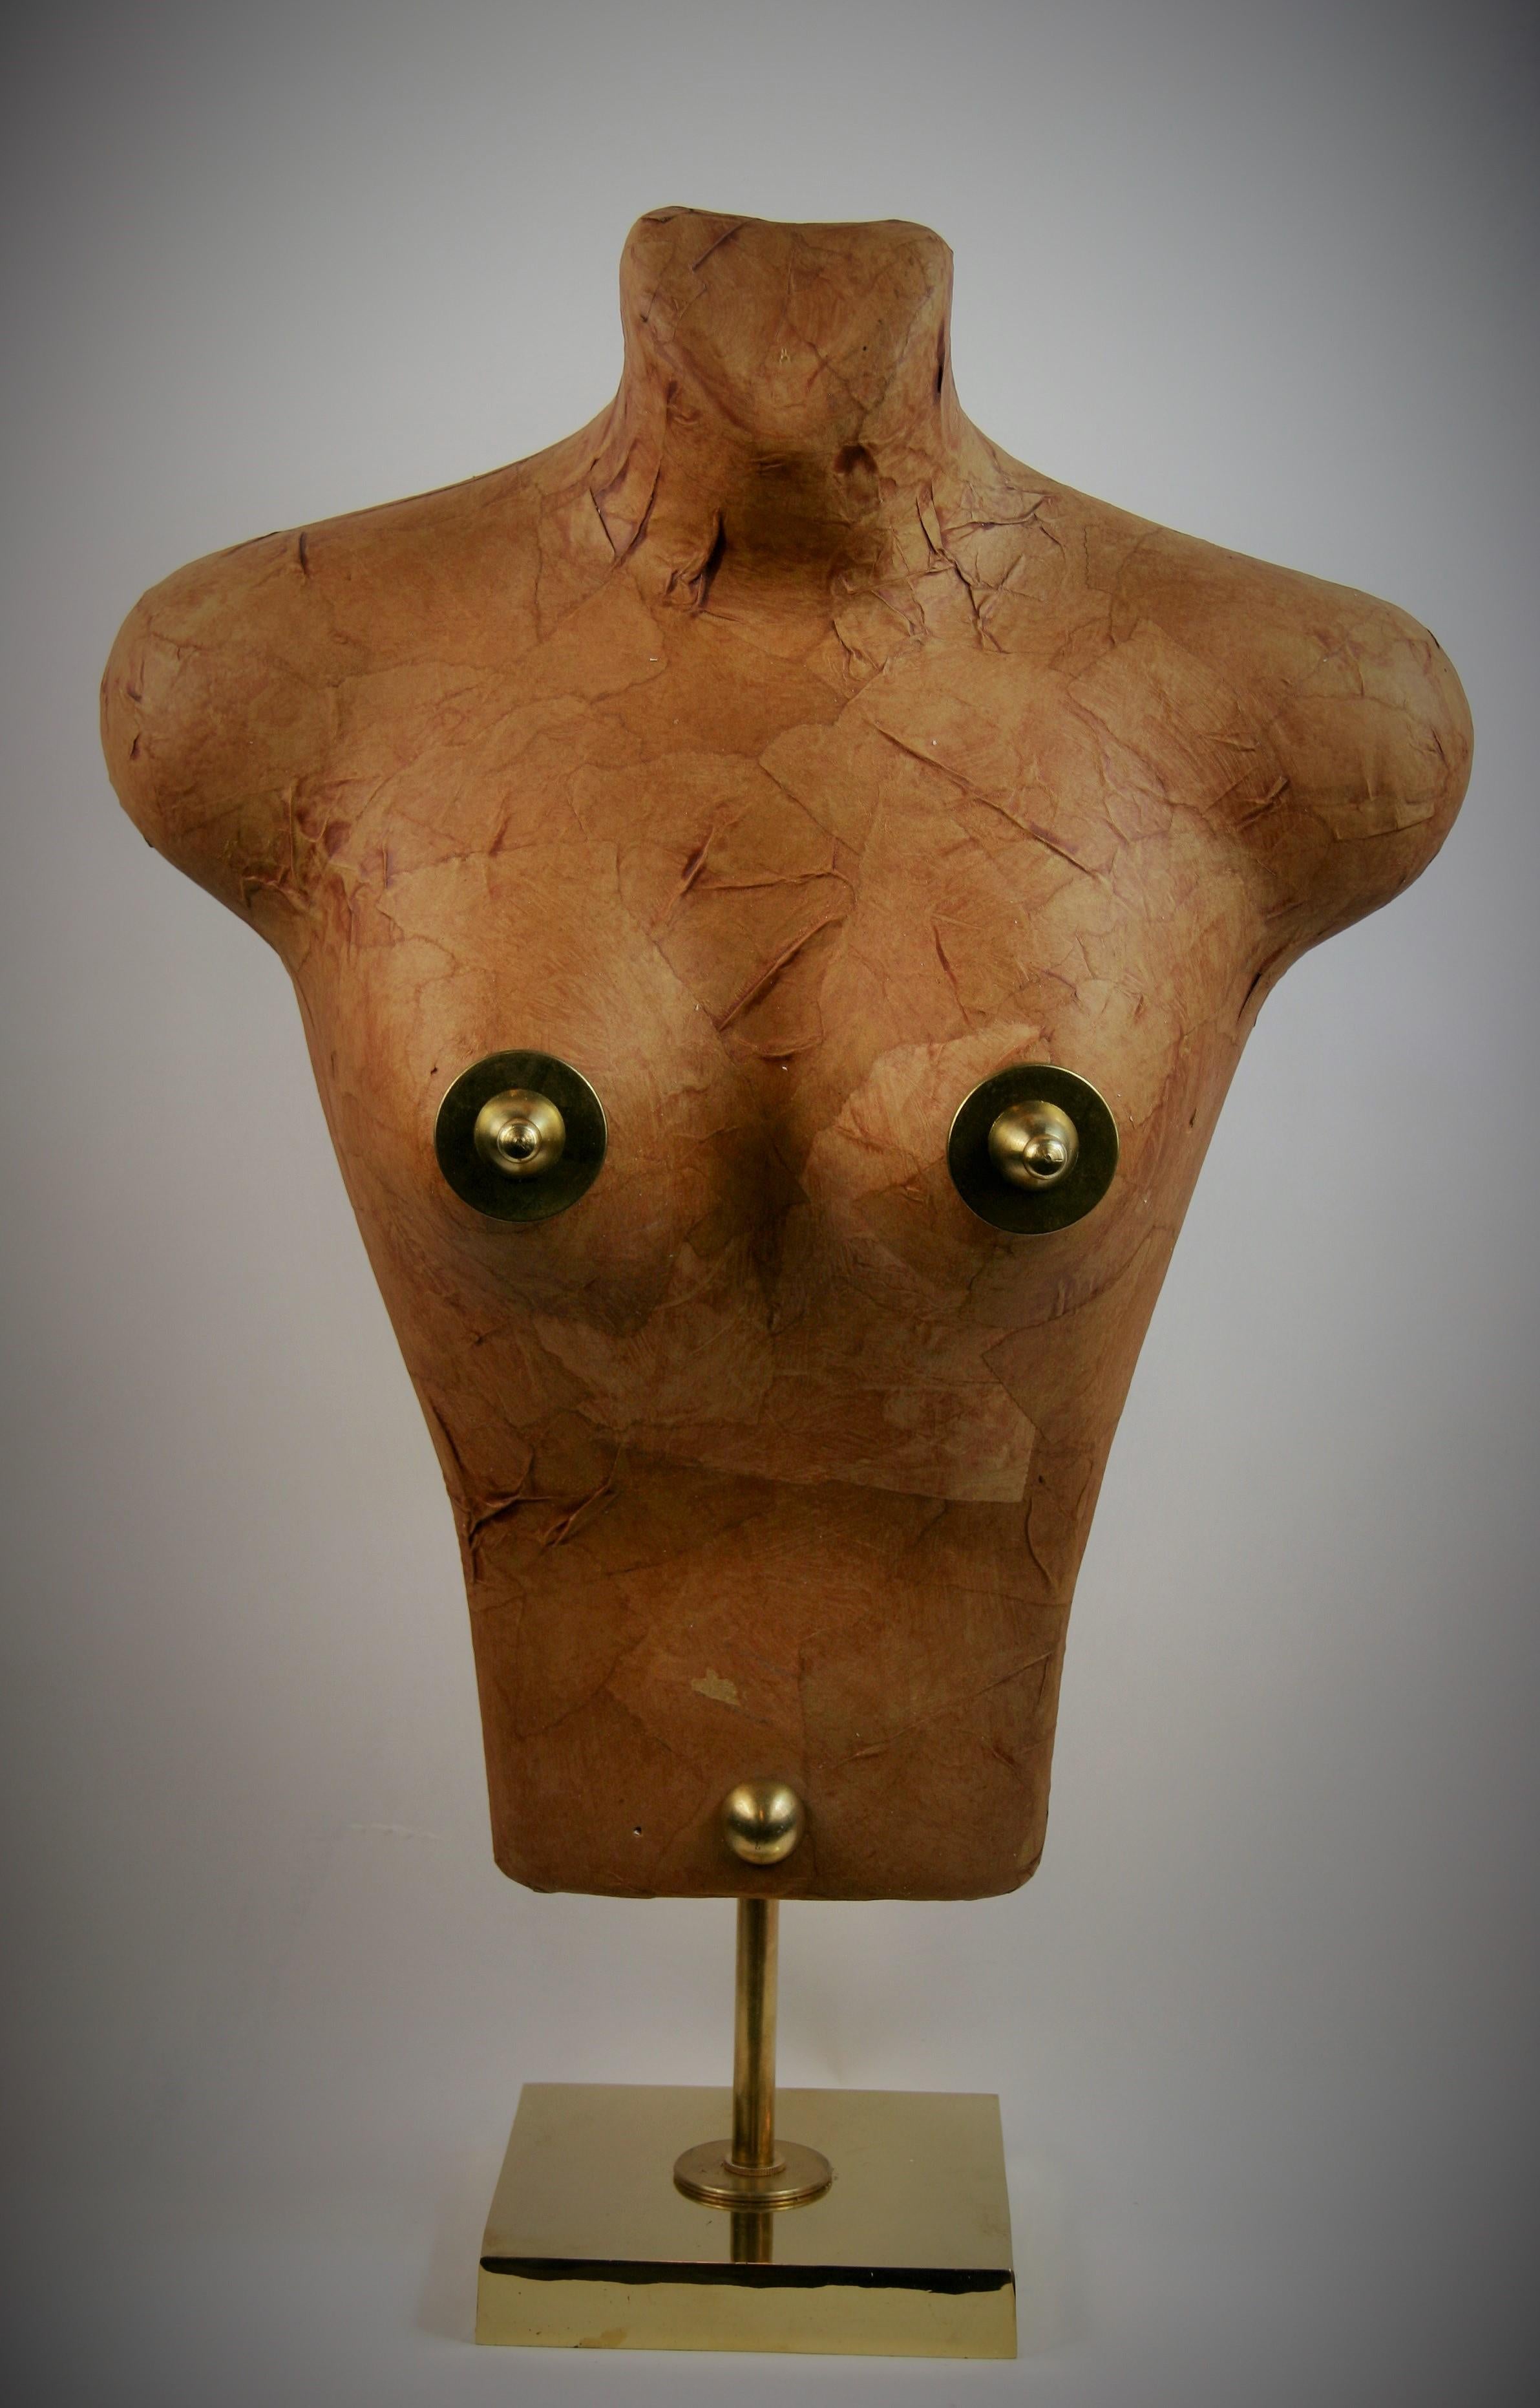 8-273 Torso sculpture made from Japanese paper applied to a foam structure embellished with brass on a
polished brass base created by Brunelli in 1985.